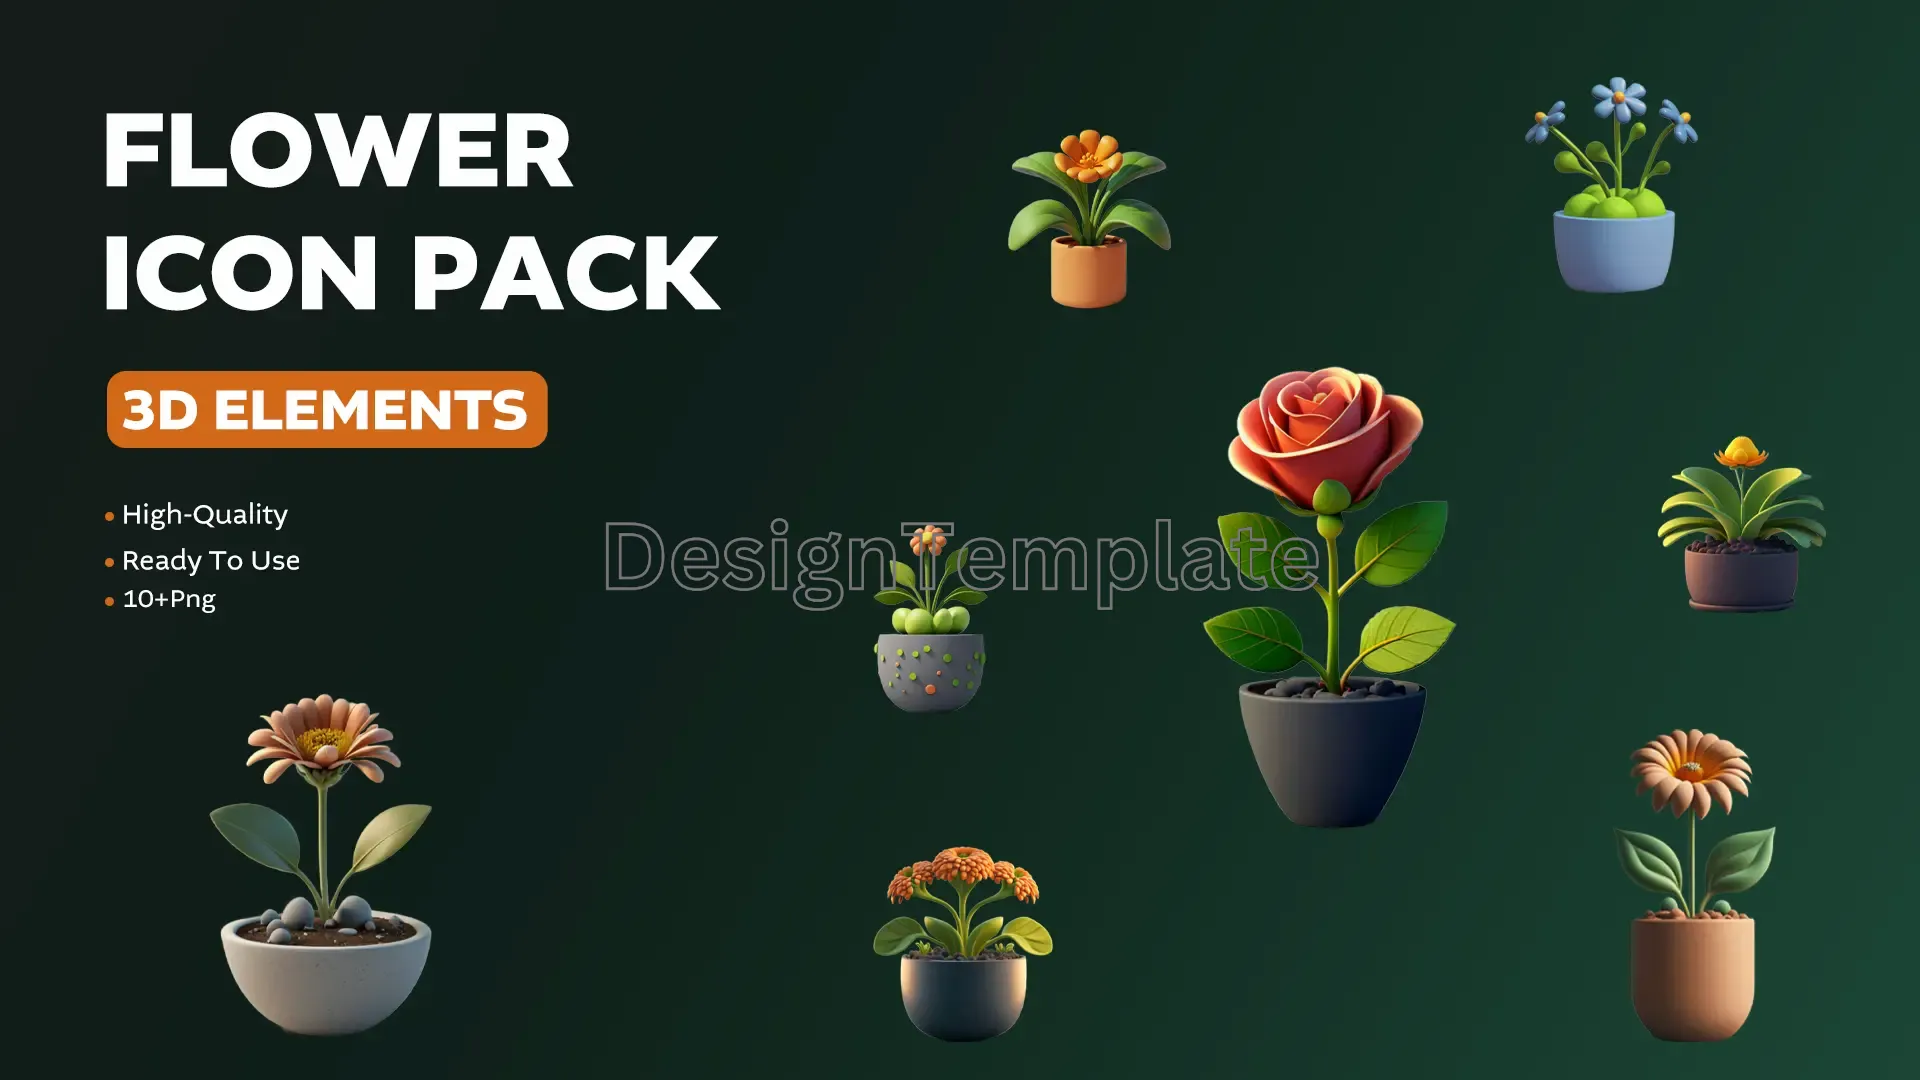 Blossom Bunch Flower Icon Pack 3D Elements Collection image